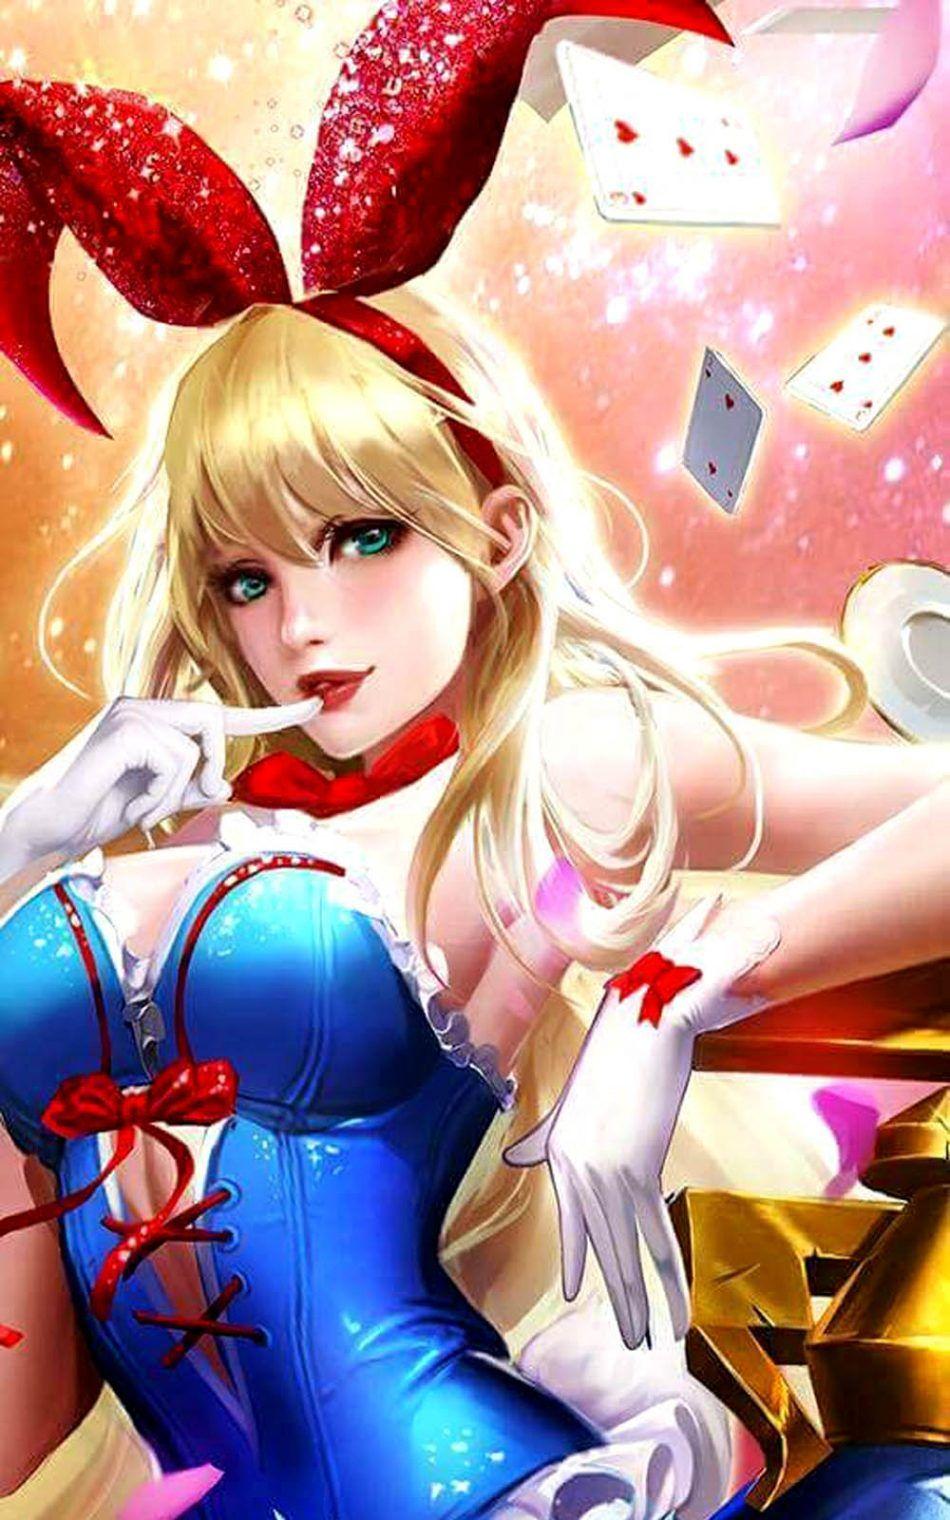 Download The Bunny Girl Layla Mobile Legends Free Pure 4K Ultra HD